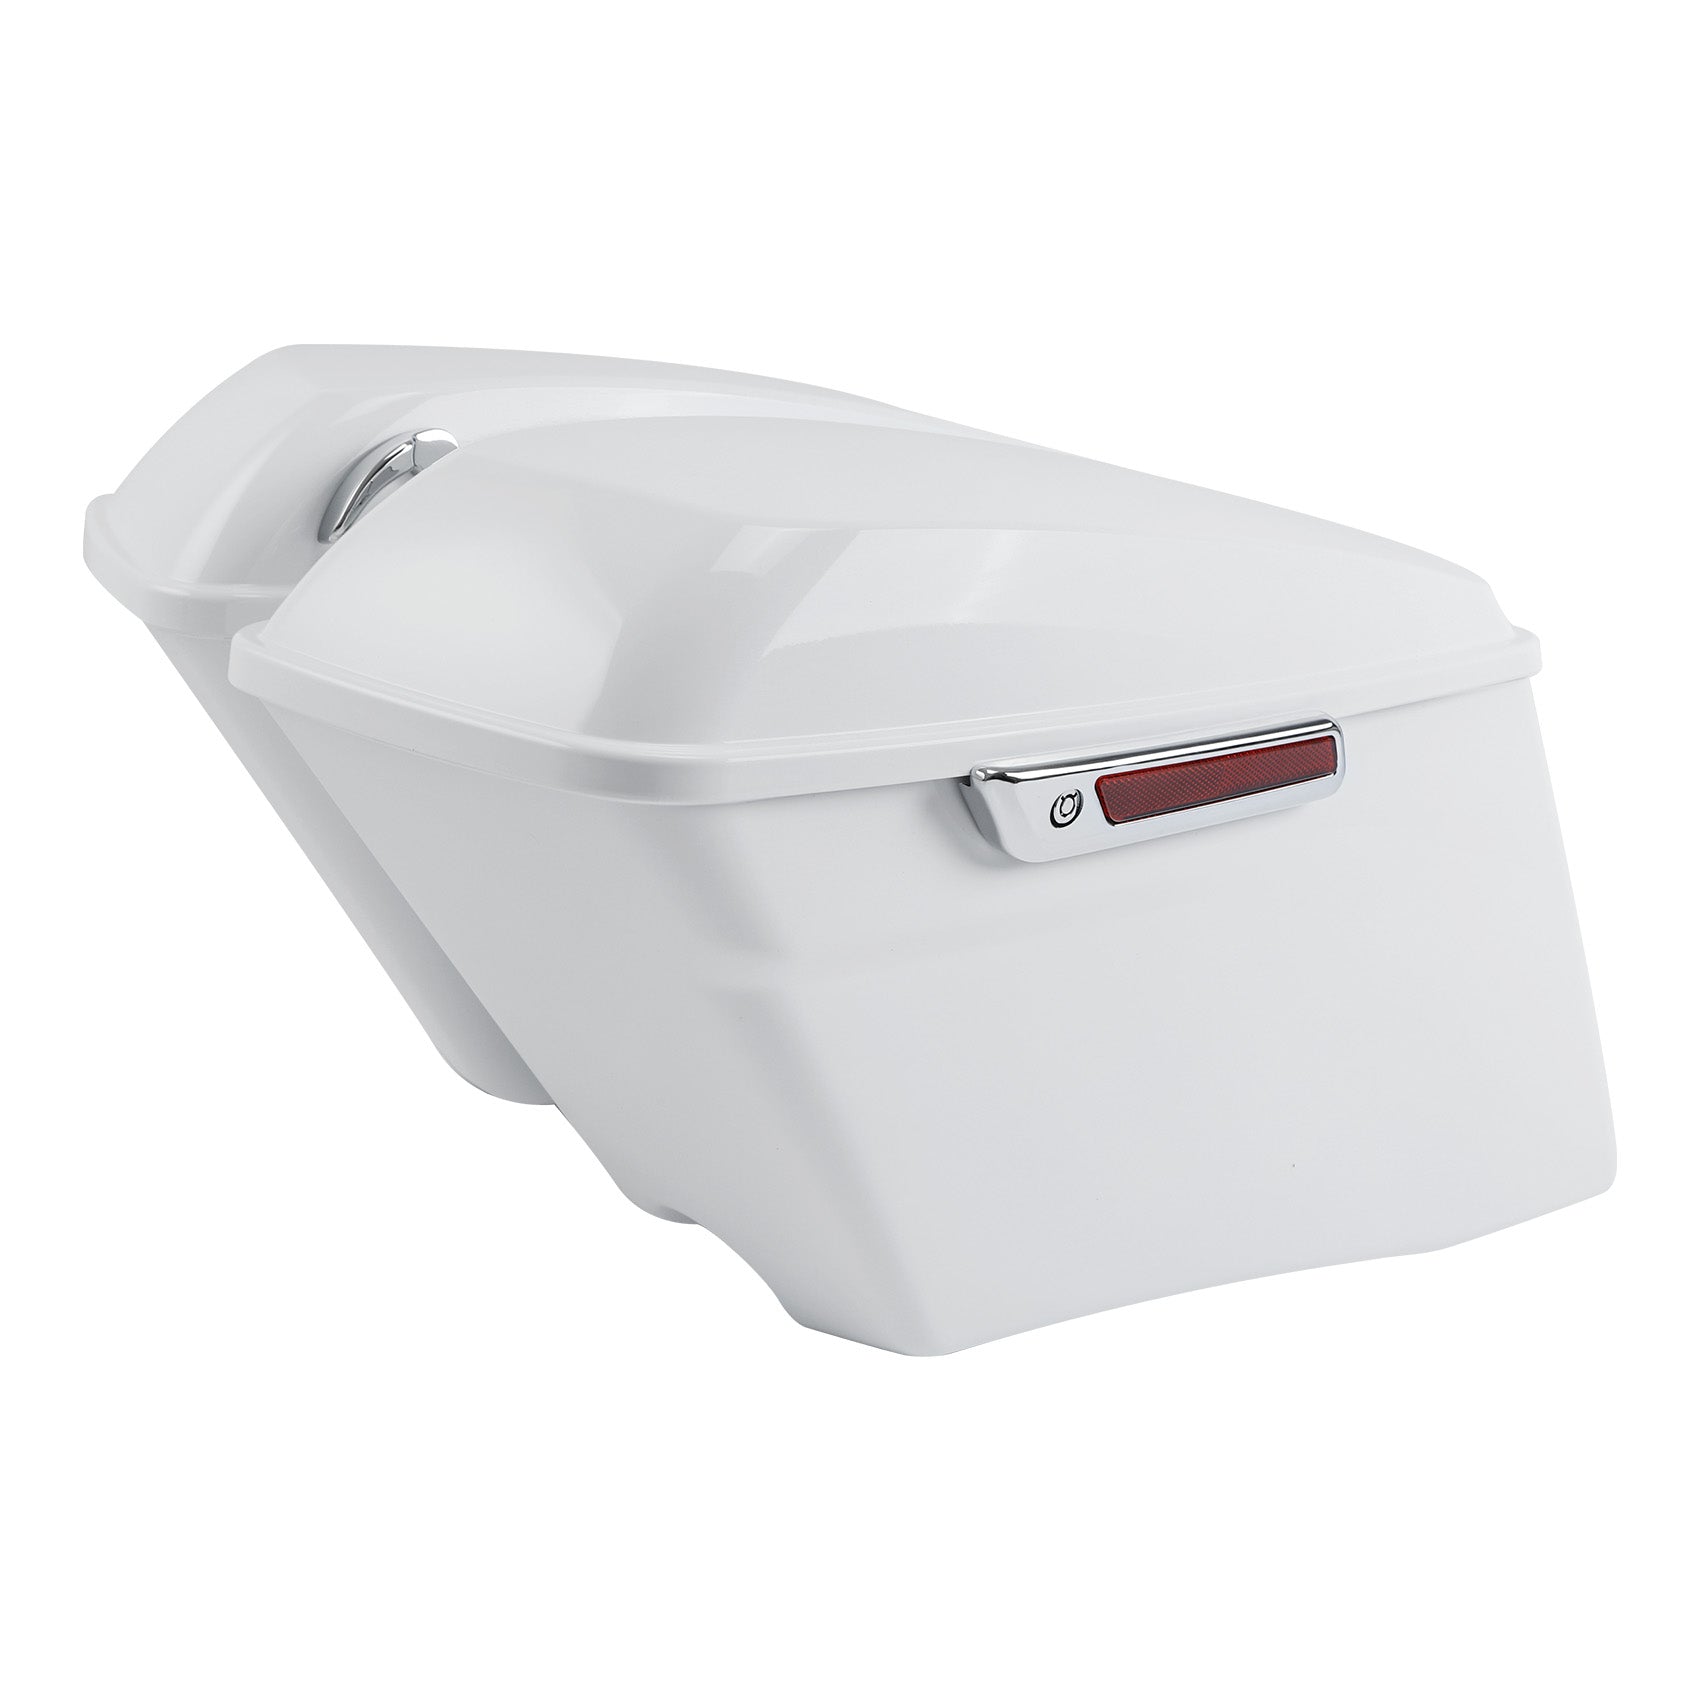 HR3 Stone Washed White Pearl CVO Stretched Saddlebags